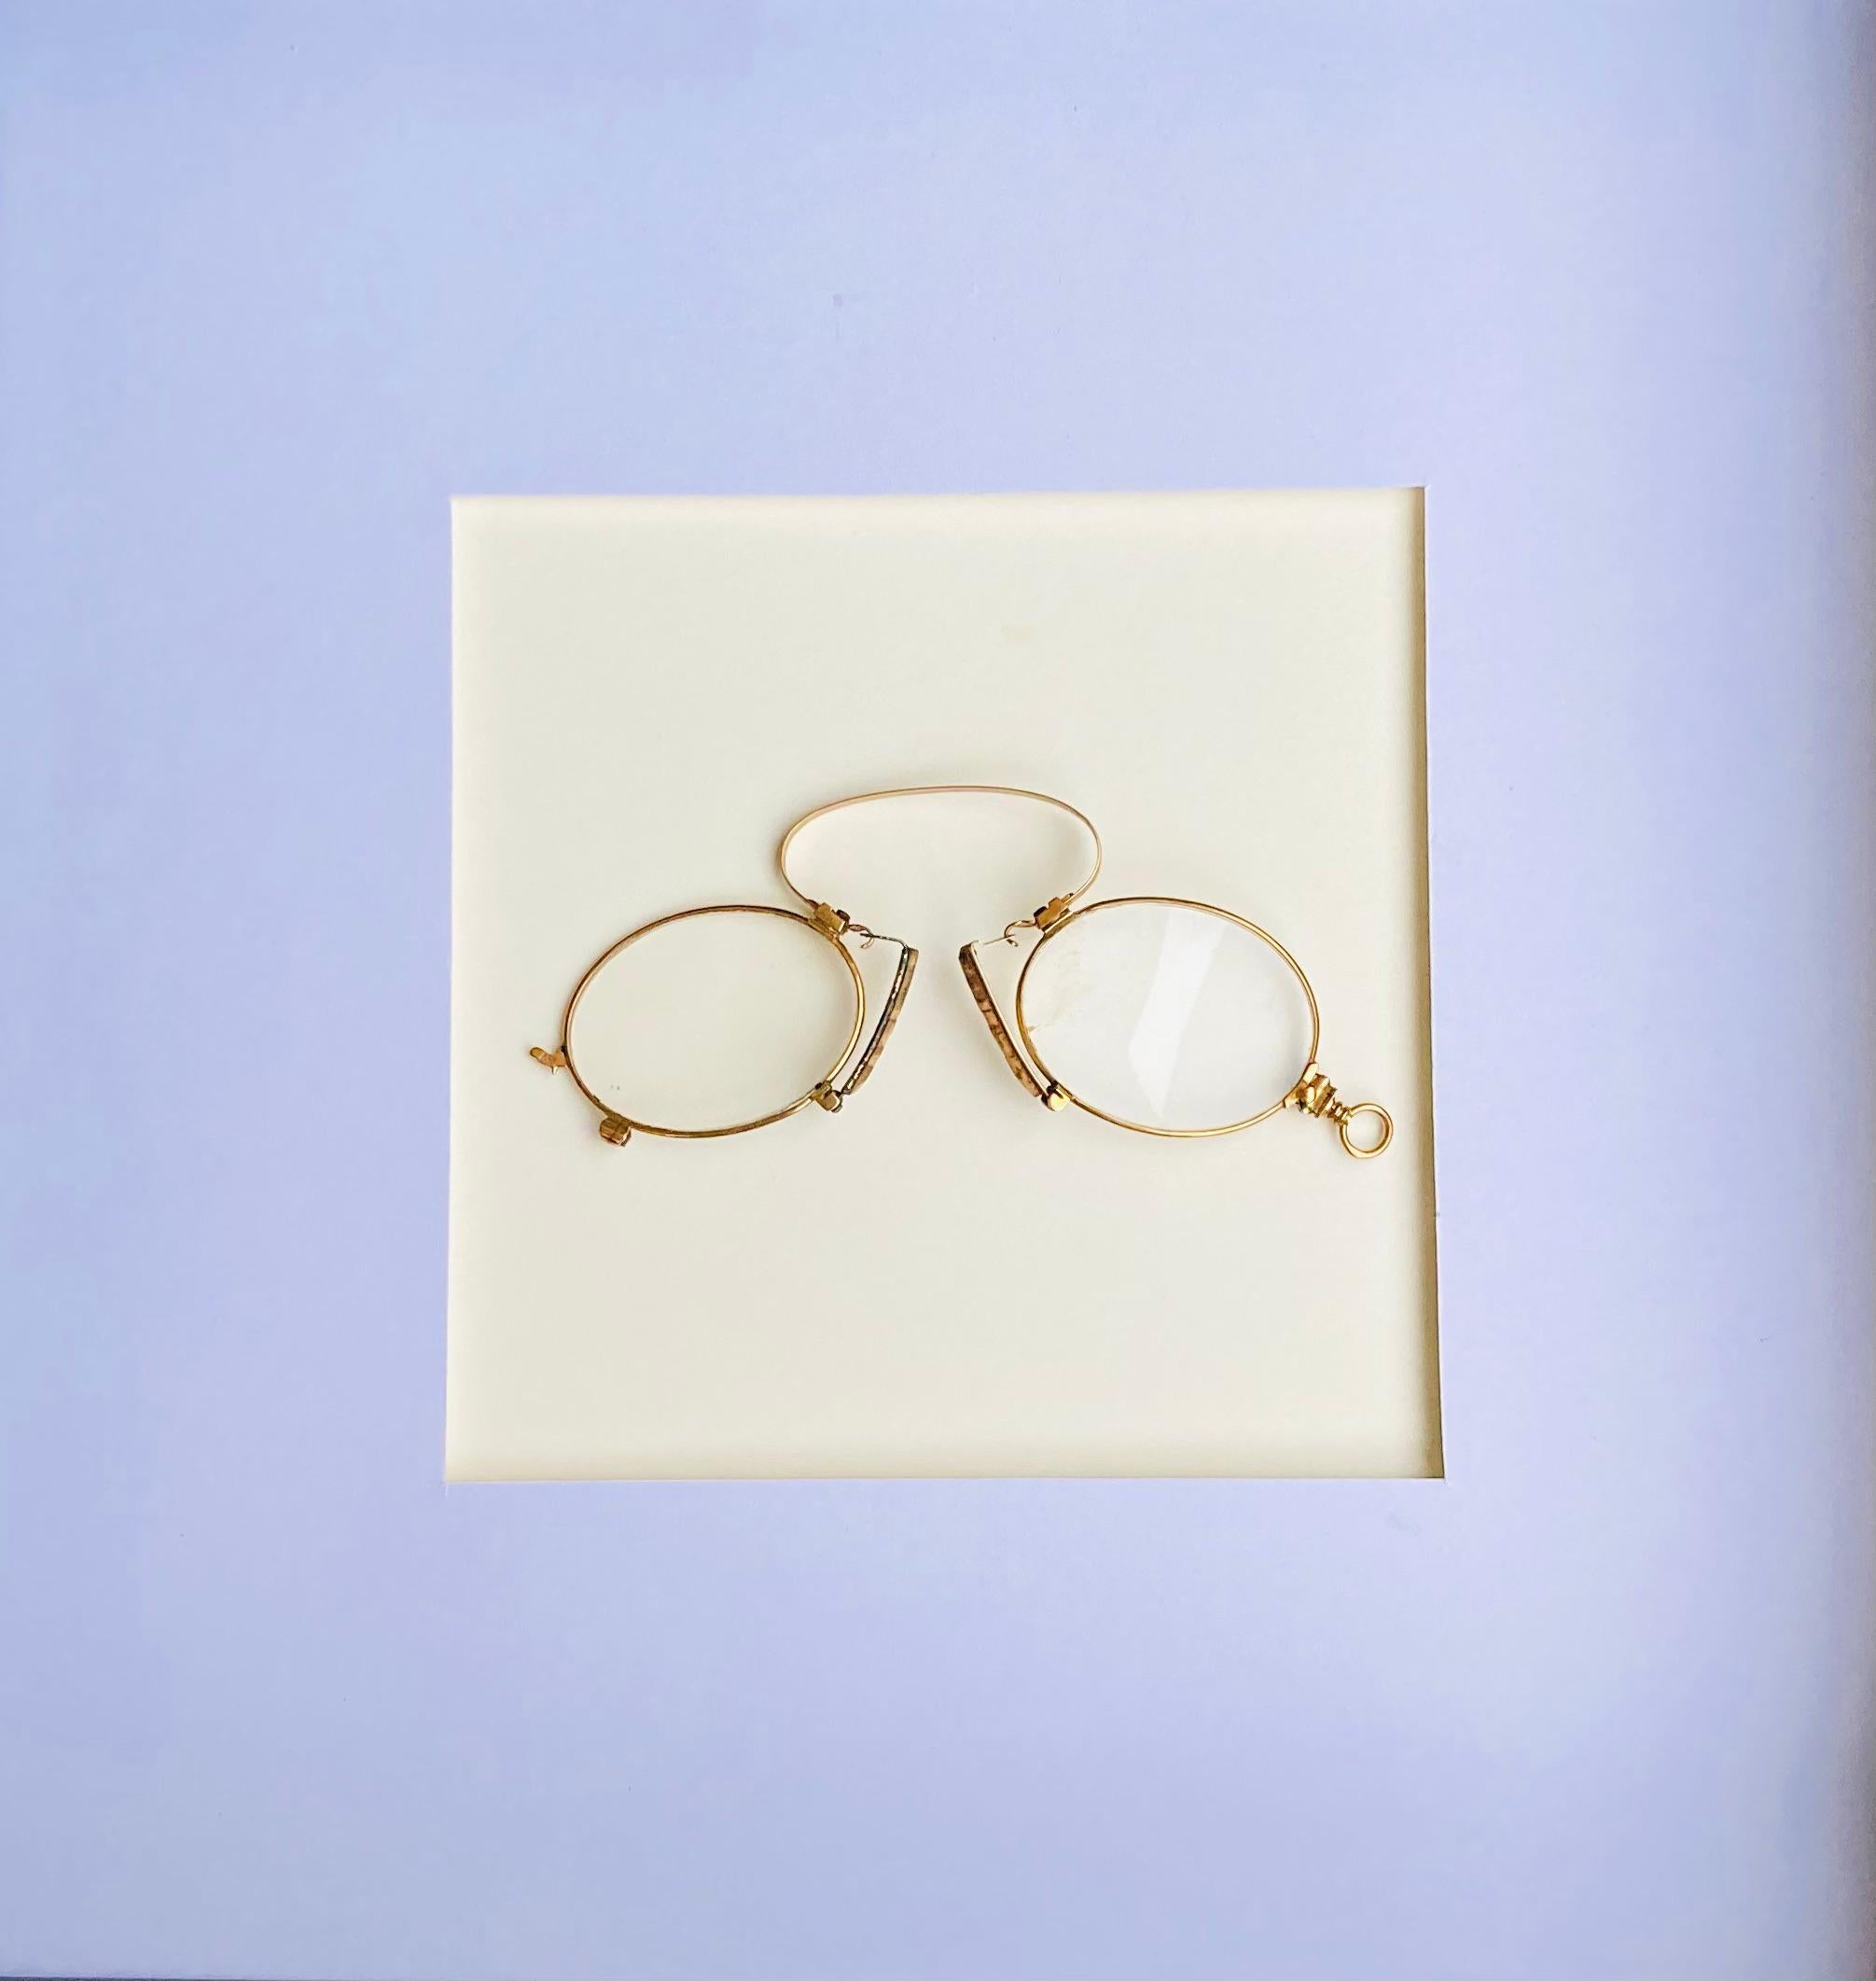 Sandra Salamonová Abstract Print - Glasses from a General, Photography, Print, Limited, Signed